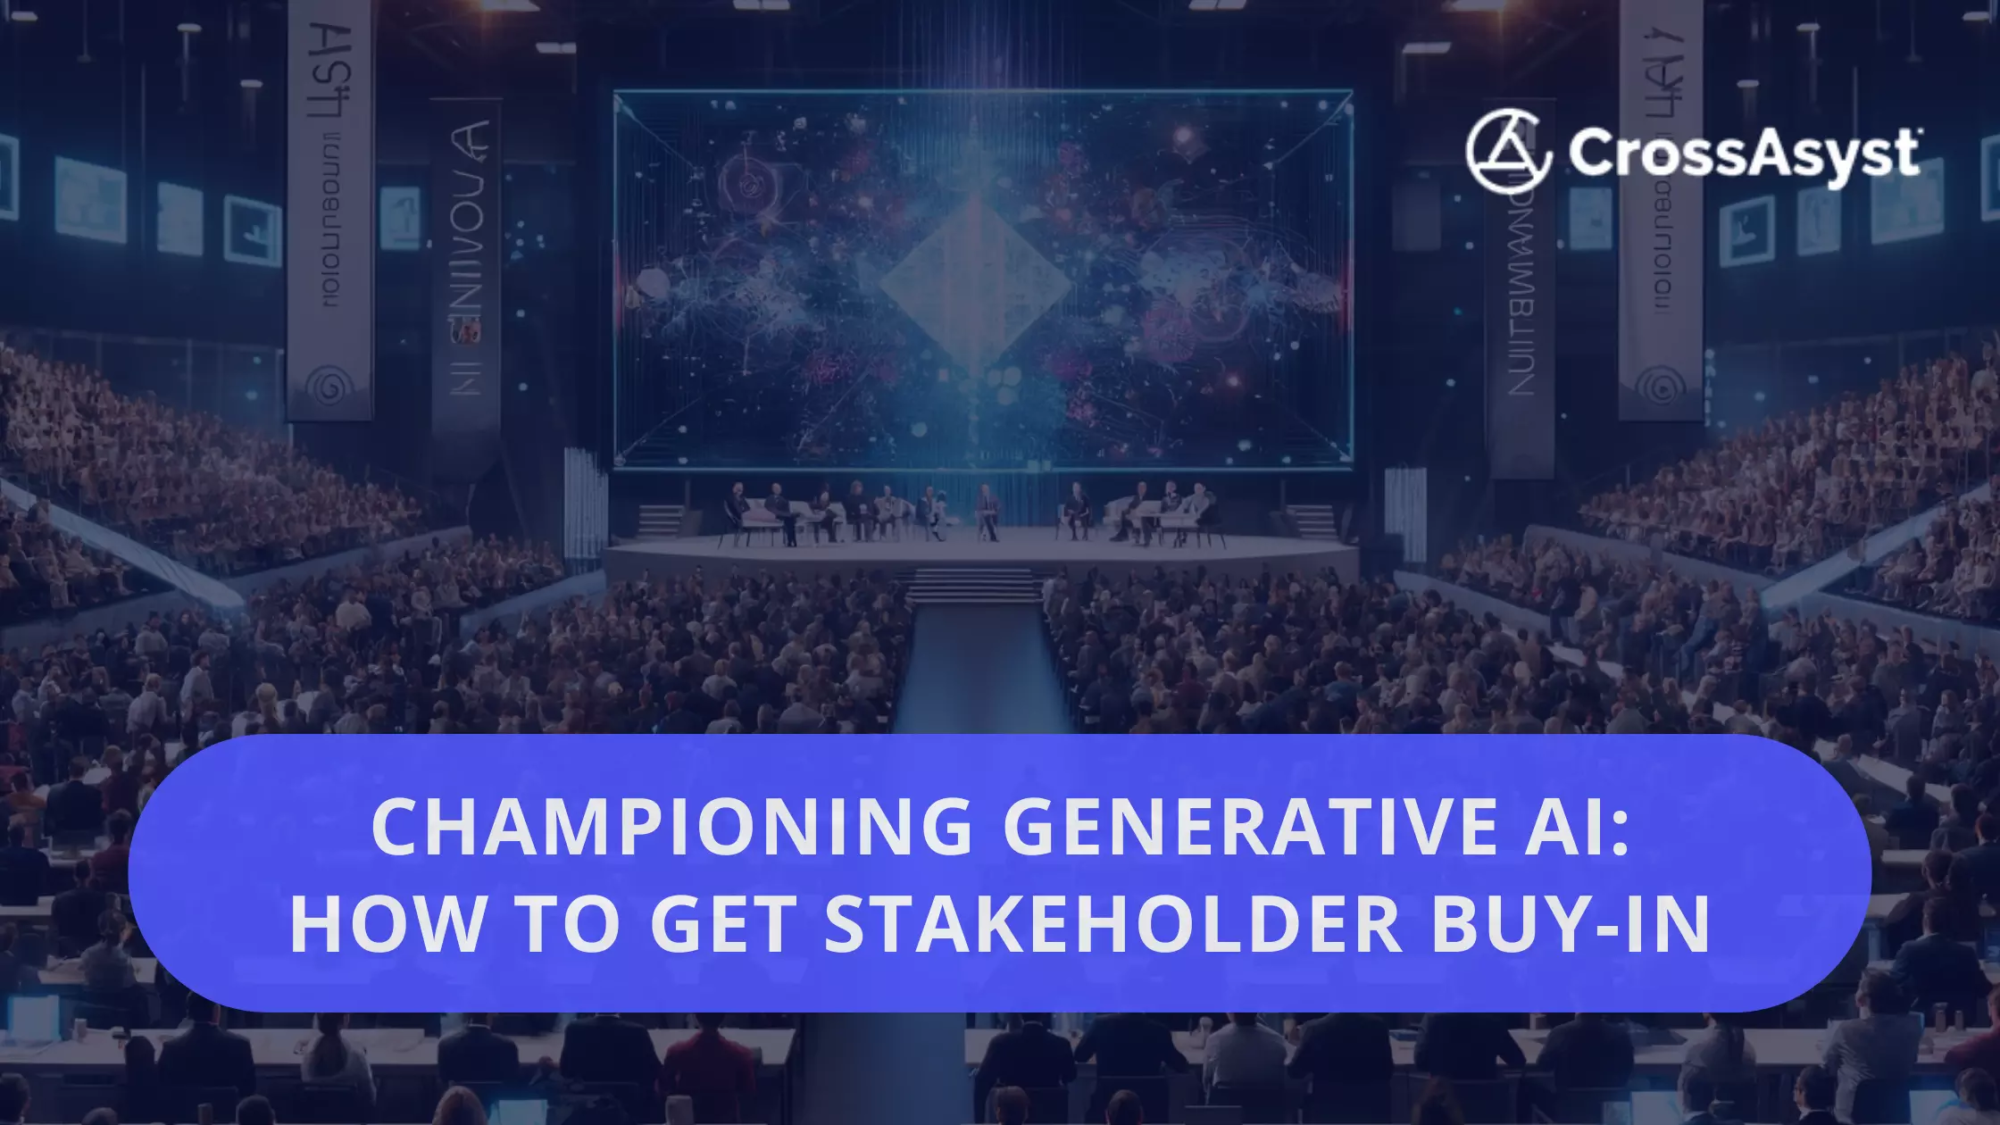 Championing Generative AI: How to Get Stakeholder Buy-In